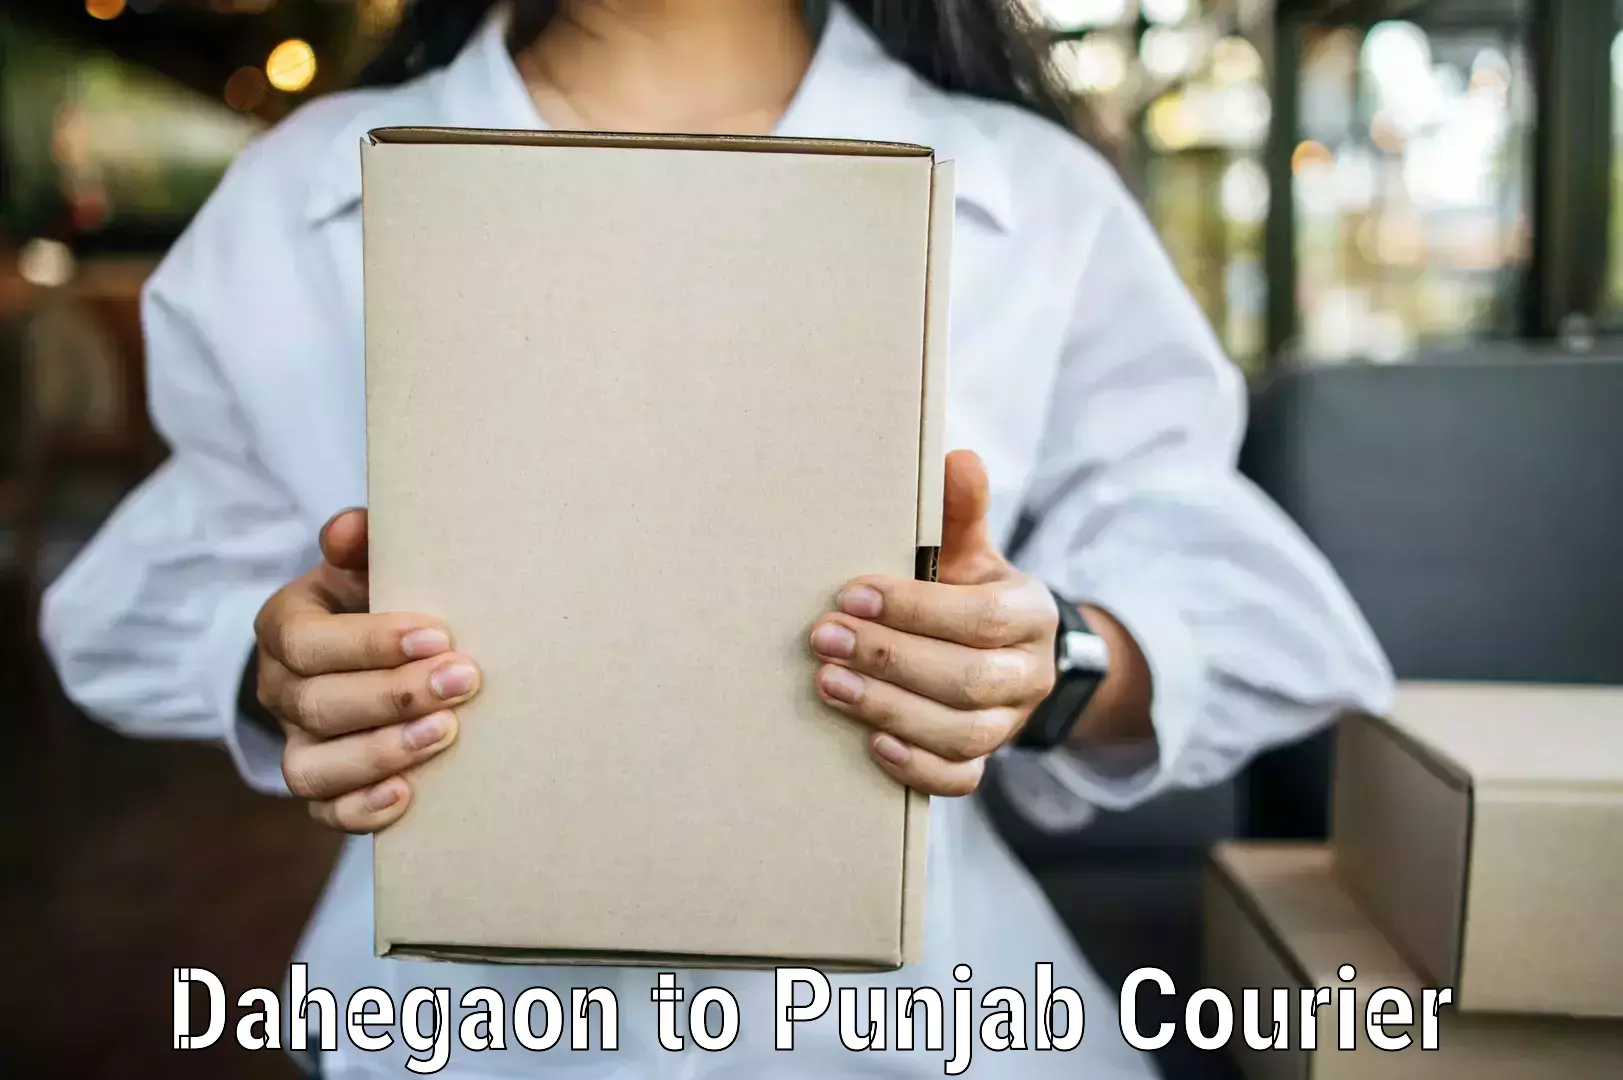 Personalized courier solutions Dahegaon to Mohali